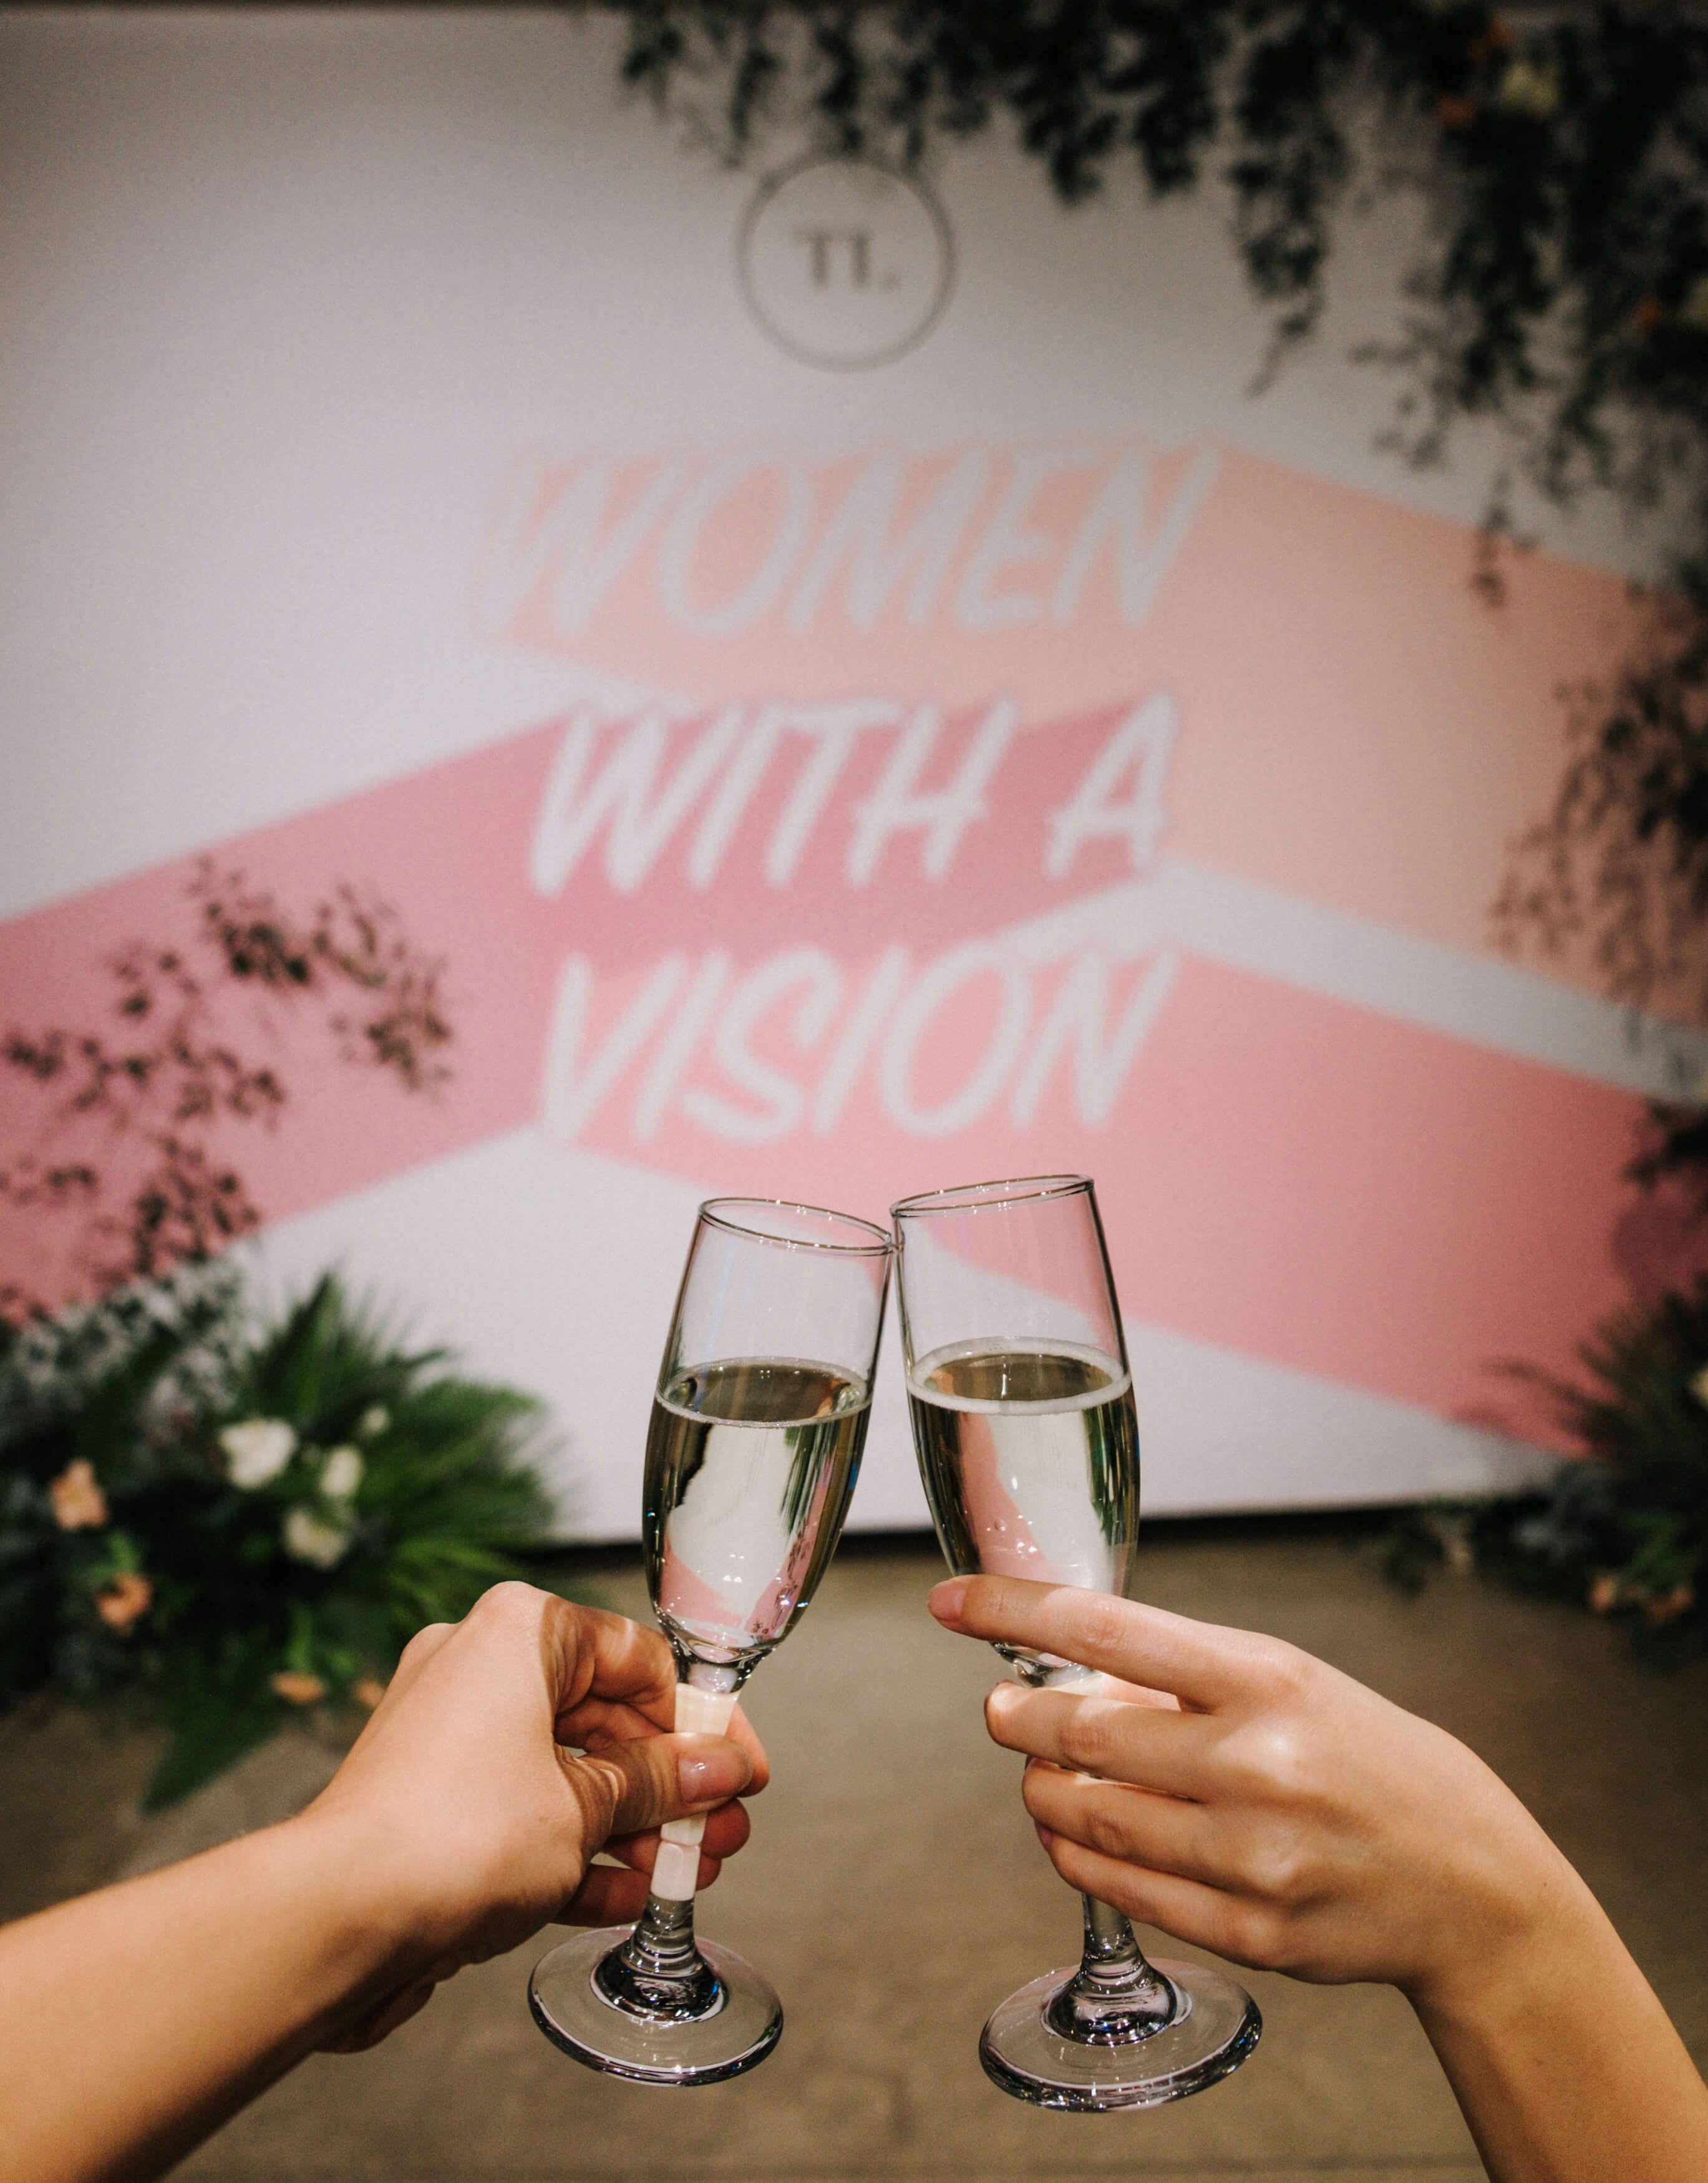 Women with a vision